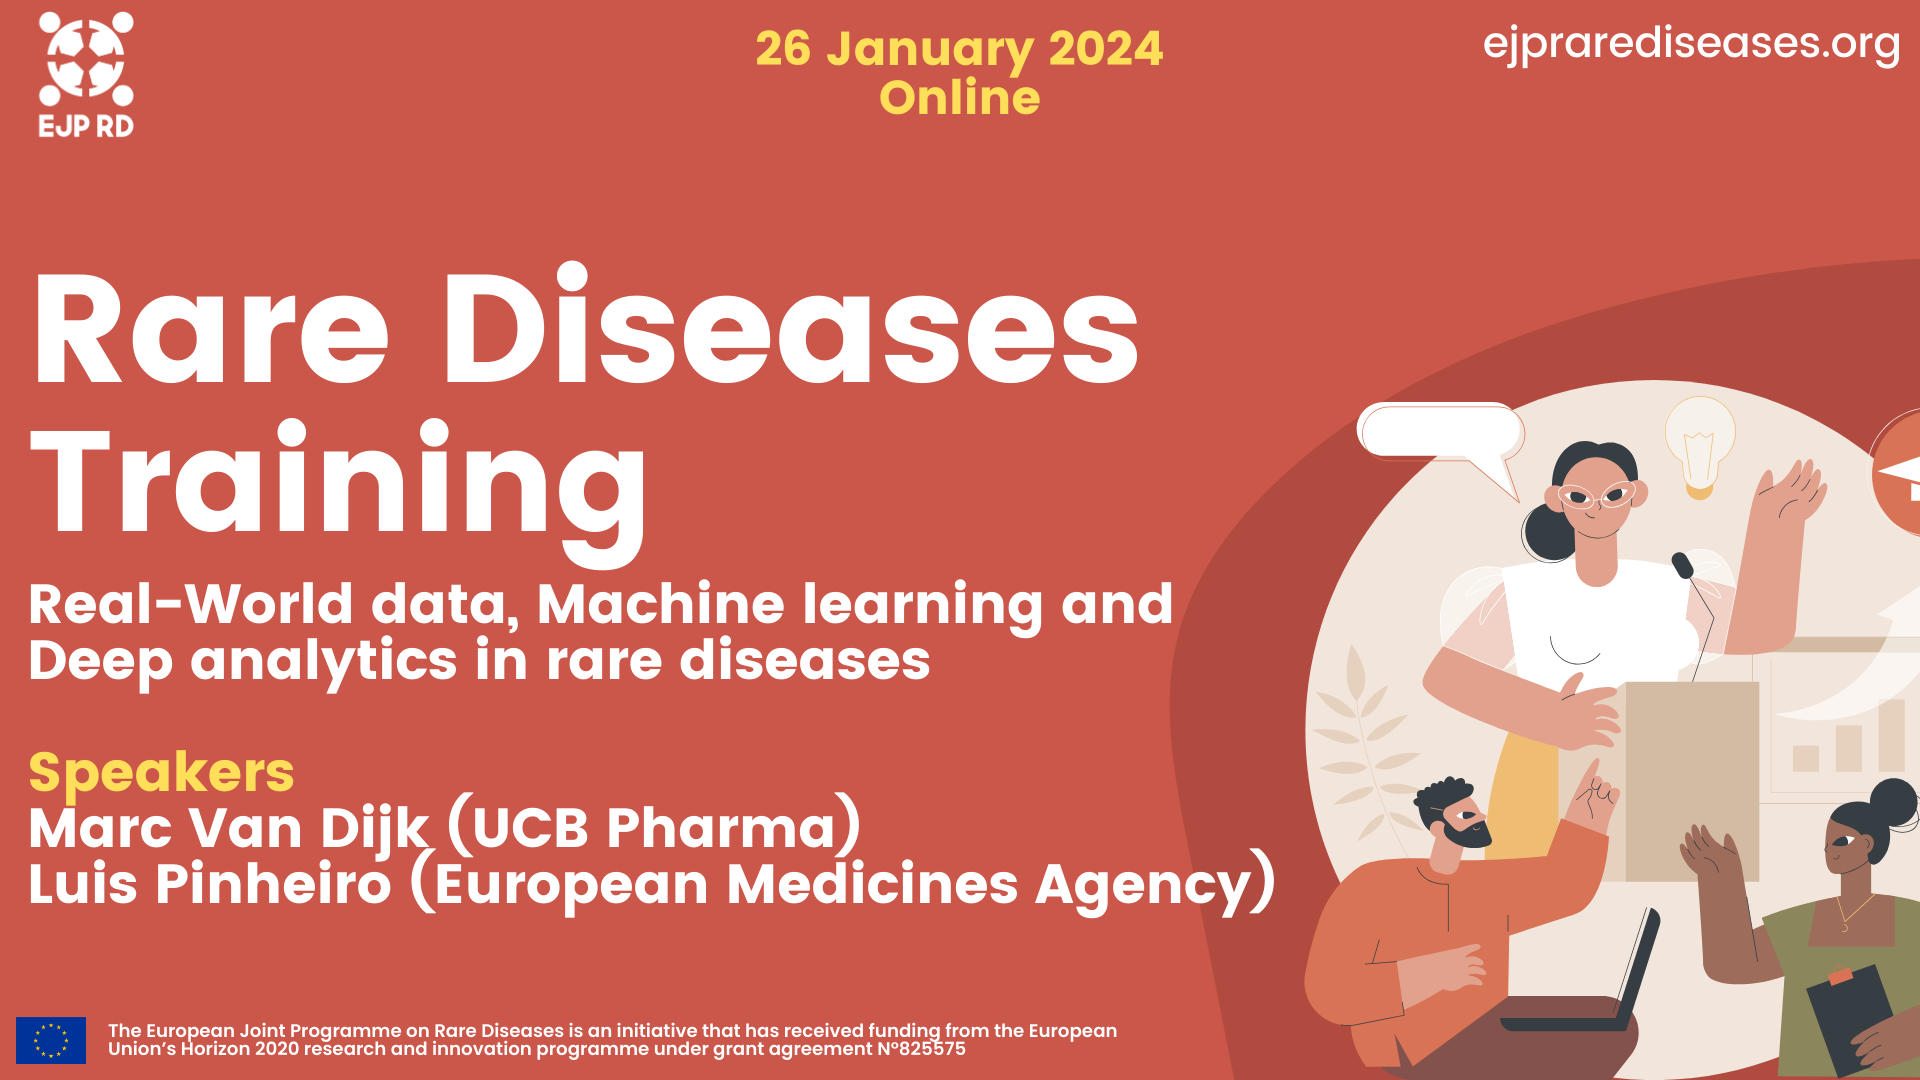 Training Webinar: Real-World data, Machine learning and Deep analytics in rare diseases: Regulatory grade data collection for marketing authorization submissions – what is buzz, what is realistic?